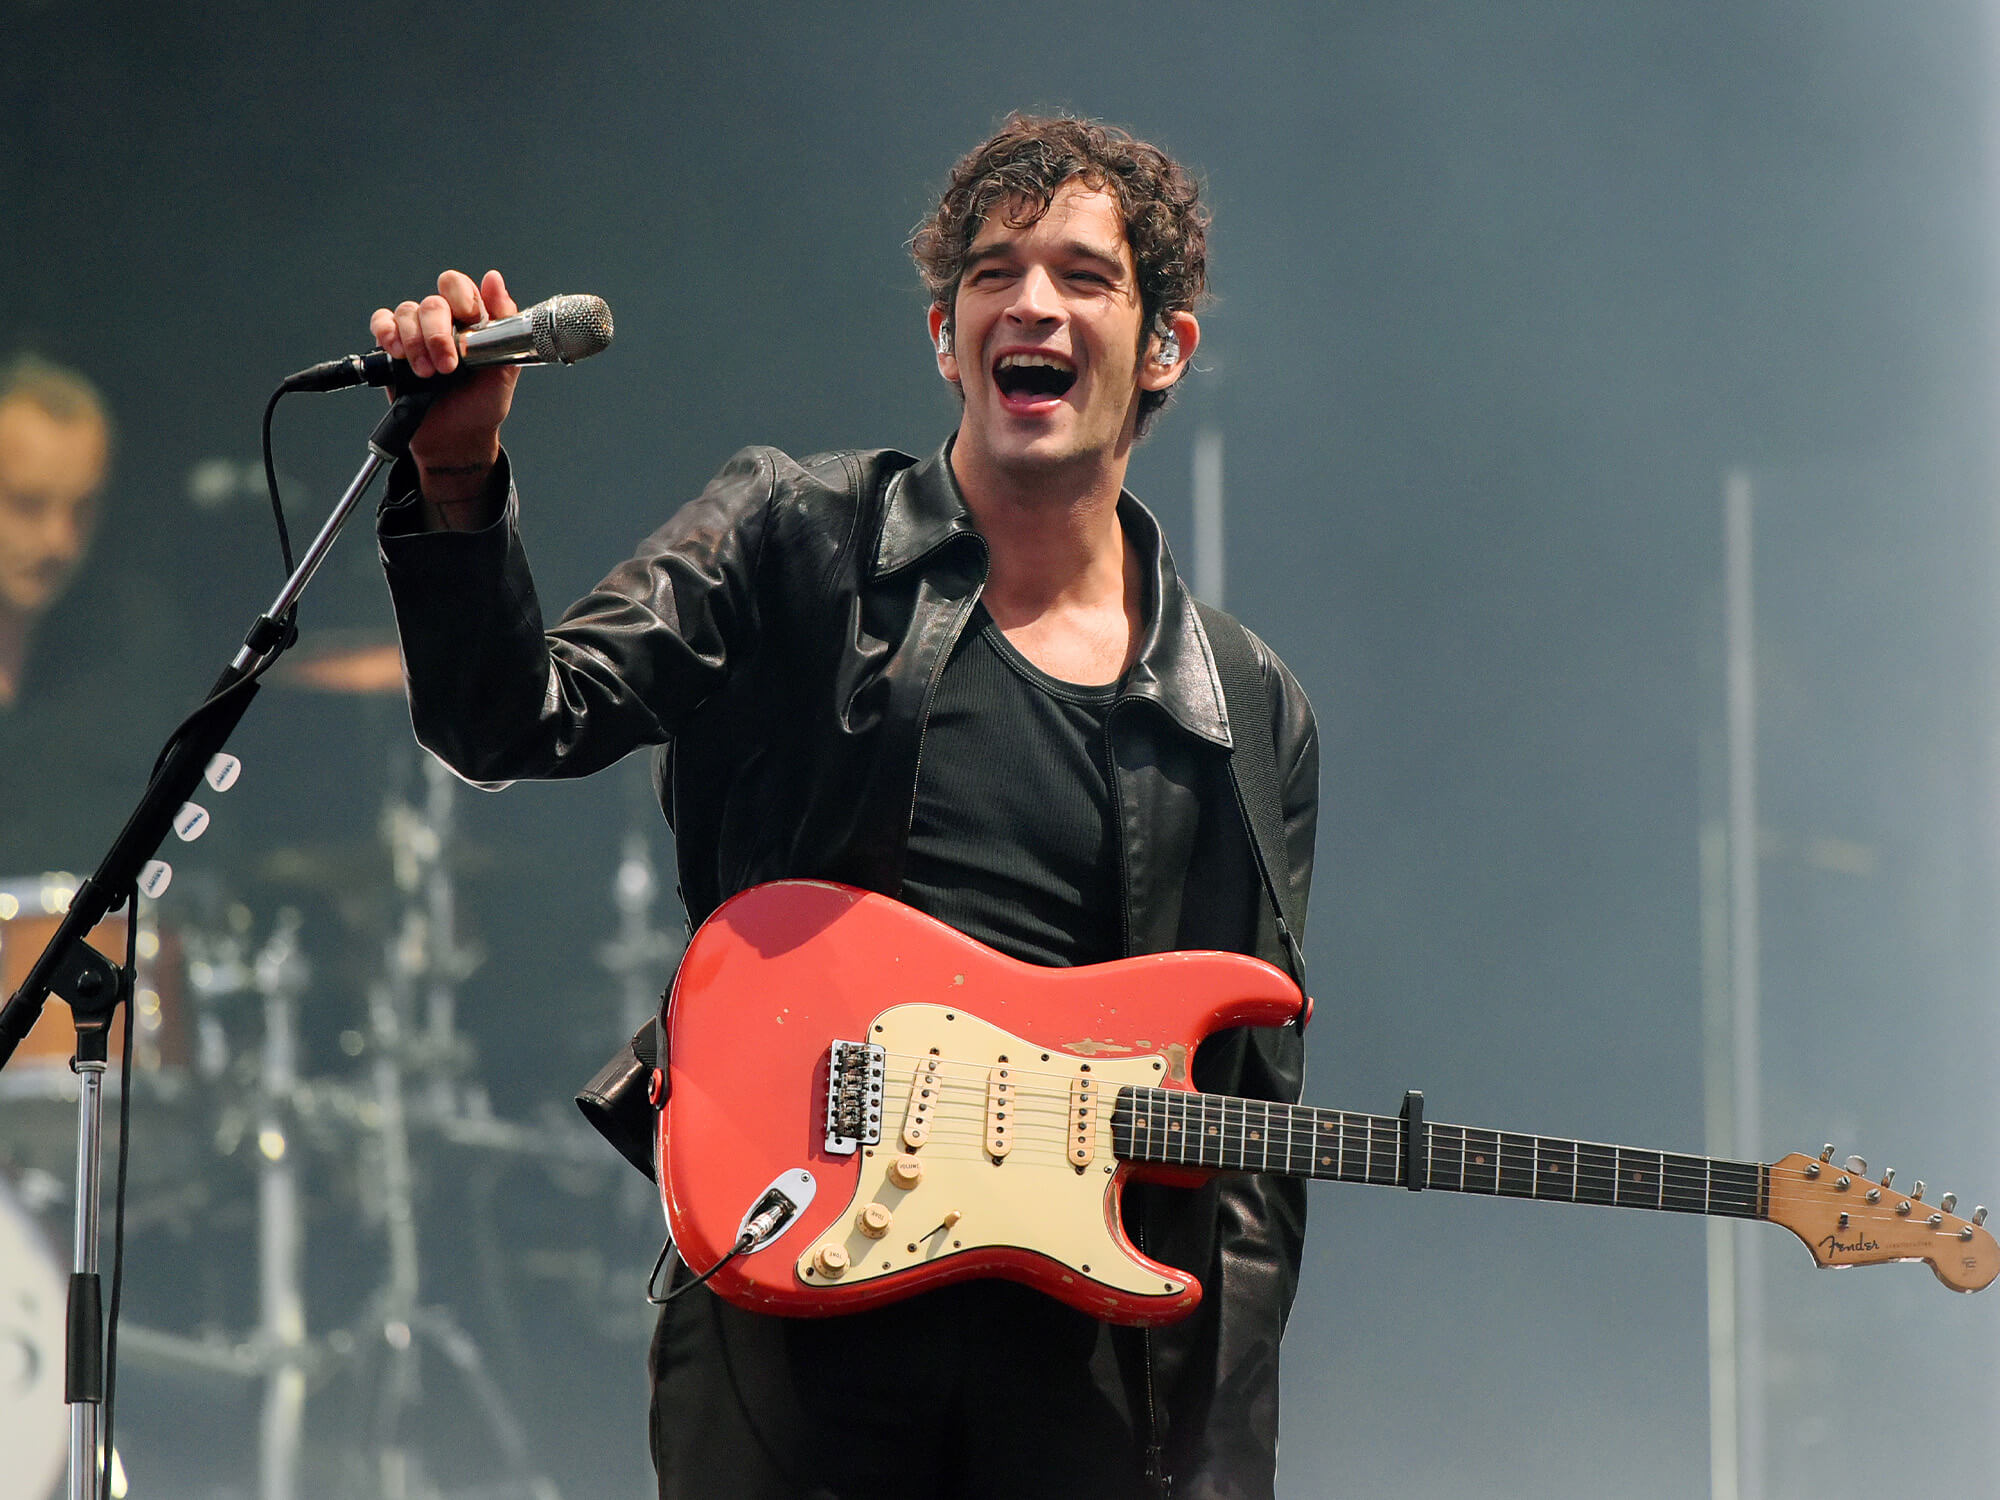 Matty Healy gripping a mic stand with one hand and smiling open mouthed whilst on stage. He has a red Fender Strat hanging from his torso.